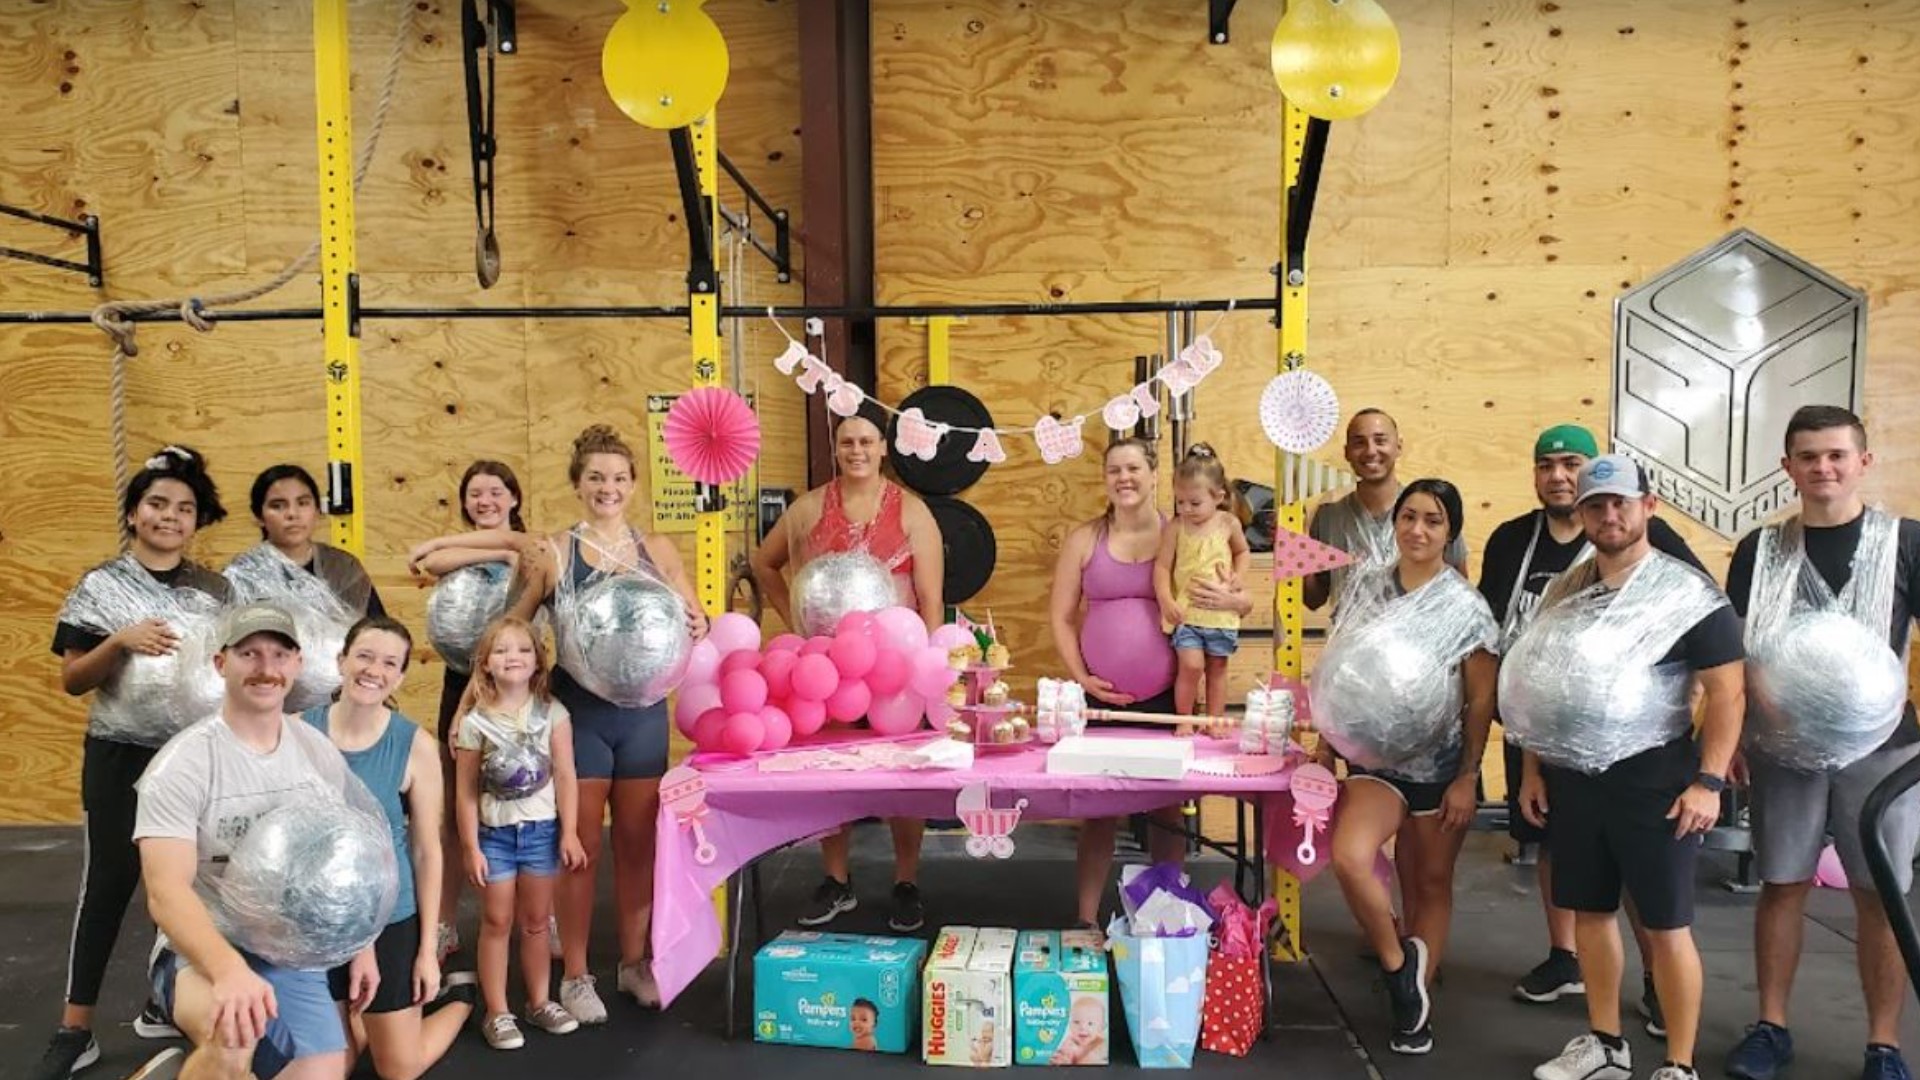 Athletes at CrossFit Forney fastened medicine balls to their stomachs to salute Mandi Sohail, an expecting mom who regularly works out despite her baby bump.